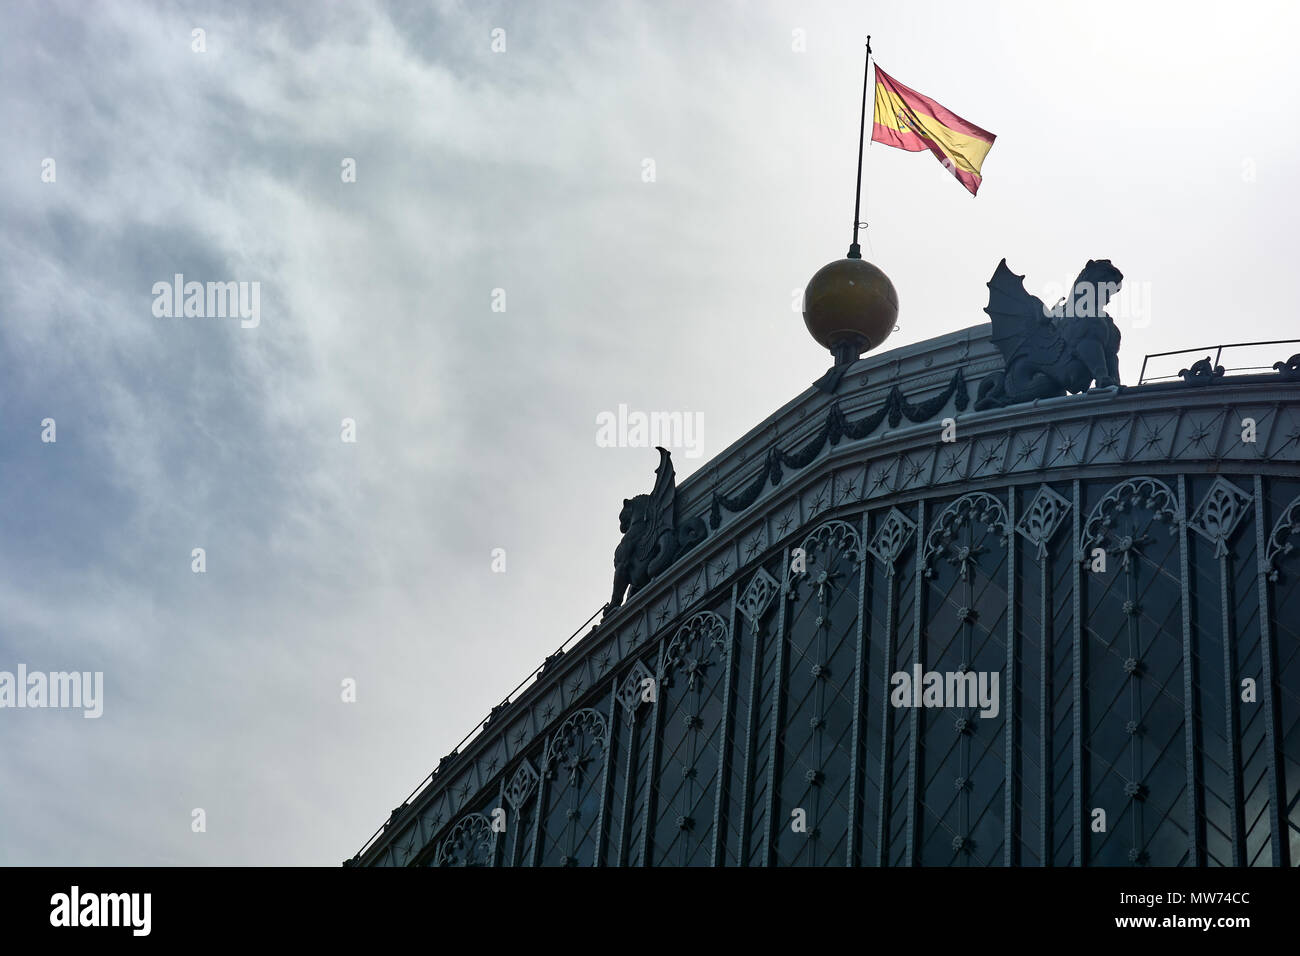 MADRID, SPAIN - APRIL 23, 2018: Details and sculptures of the top of the facade of the Puerta de Atocha railway station in Madrid, Spain. Stock Photo